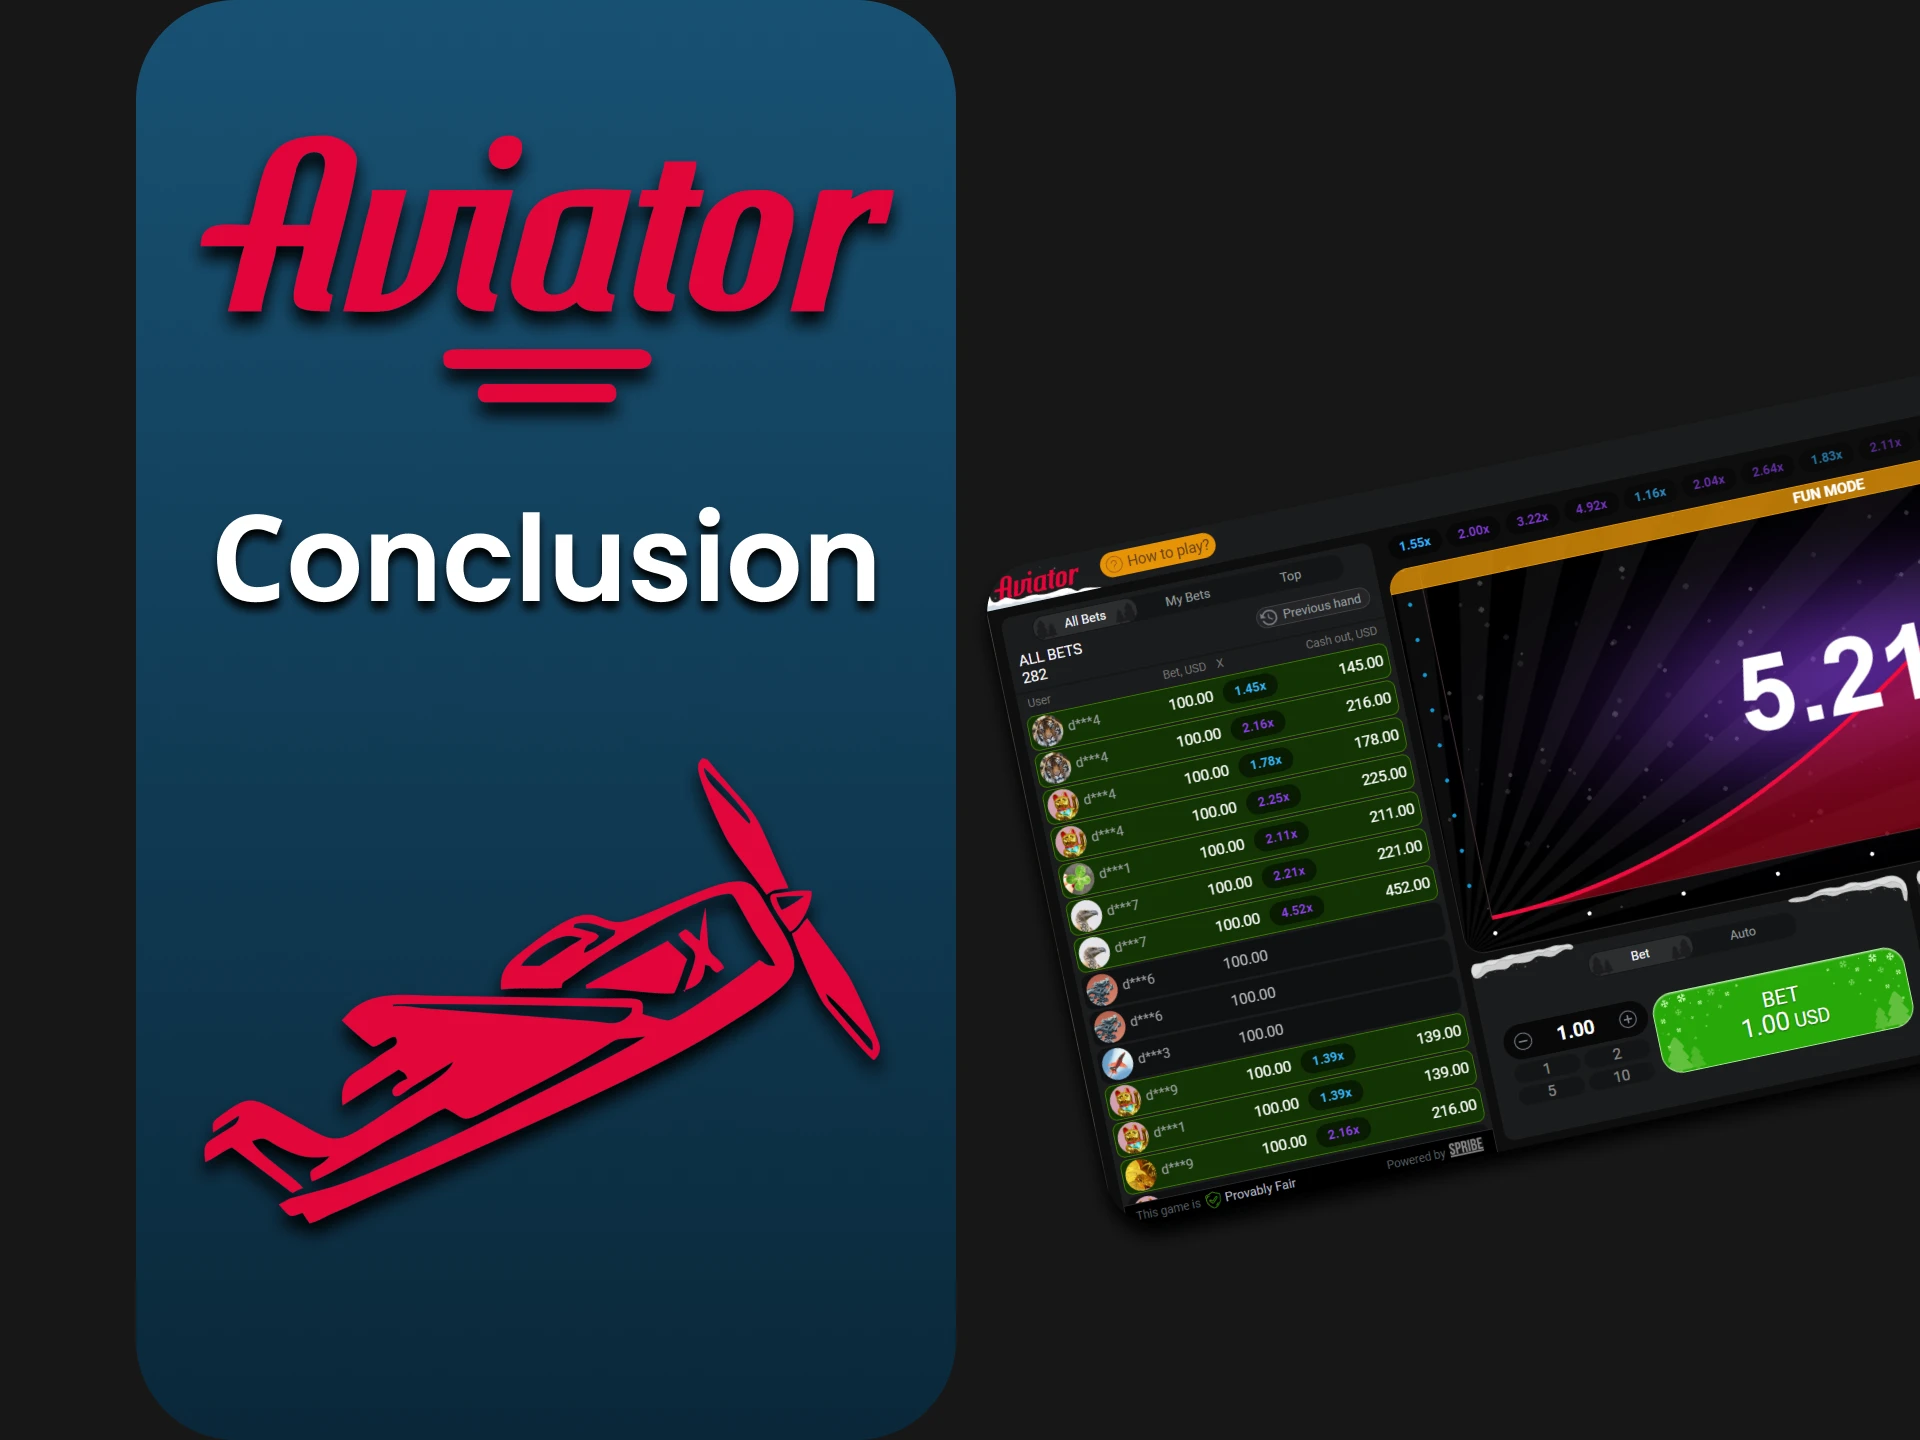 You can always practice in the demo version of the Aviator game.